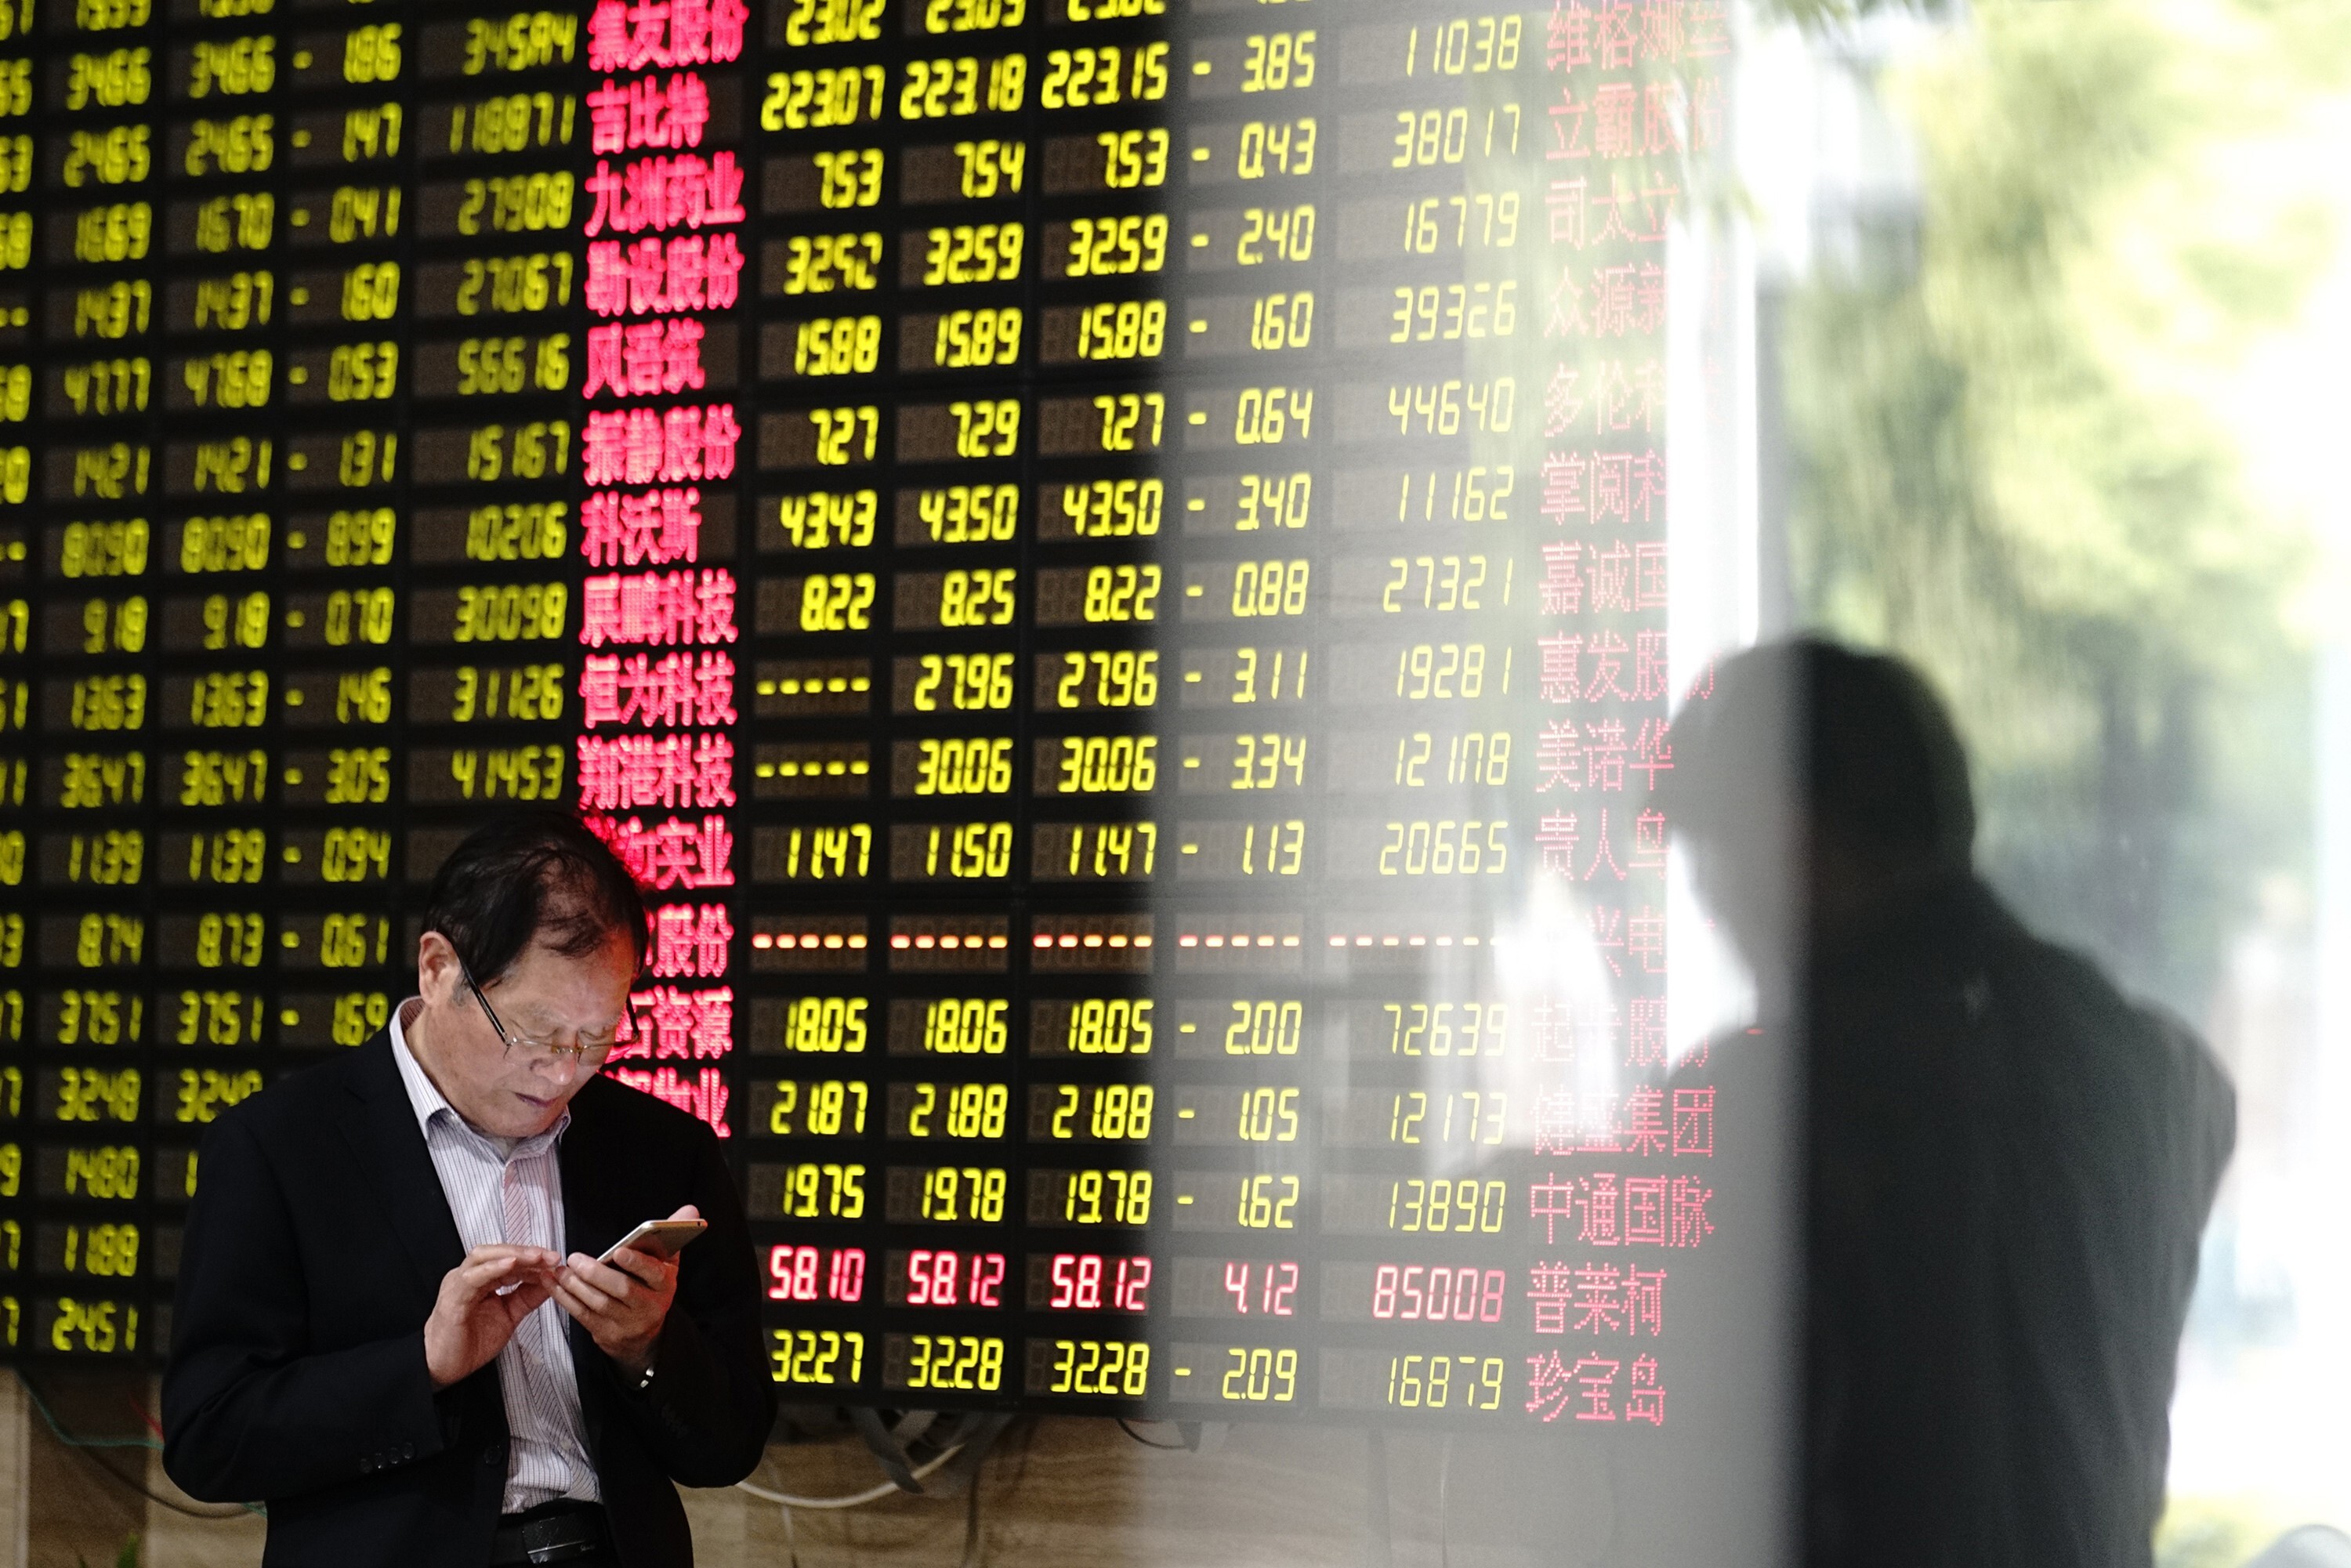 China’s Shanghai Composite Index is the third best performer this month among Asia’s major benchmarks after South Korea’s Kospi and Taiwan’s Taiex. Photo: AP Photo